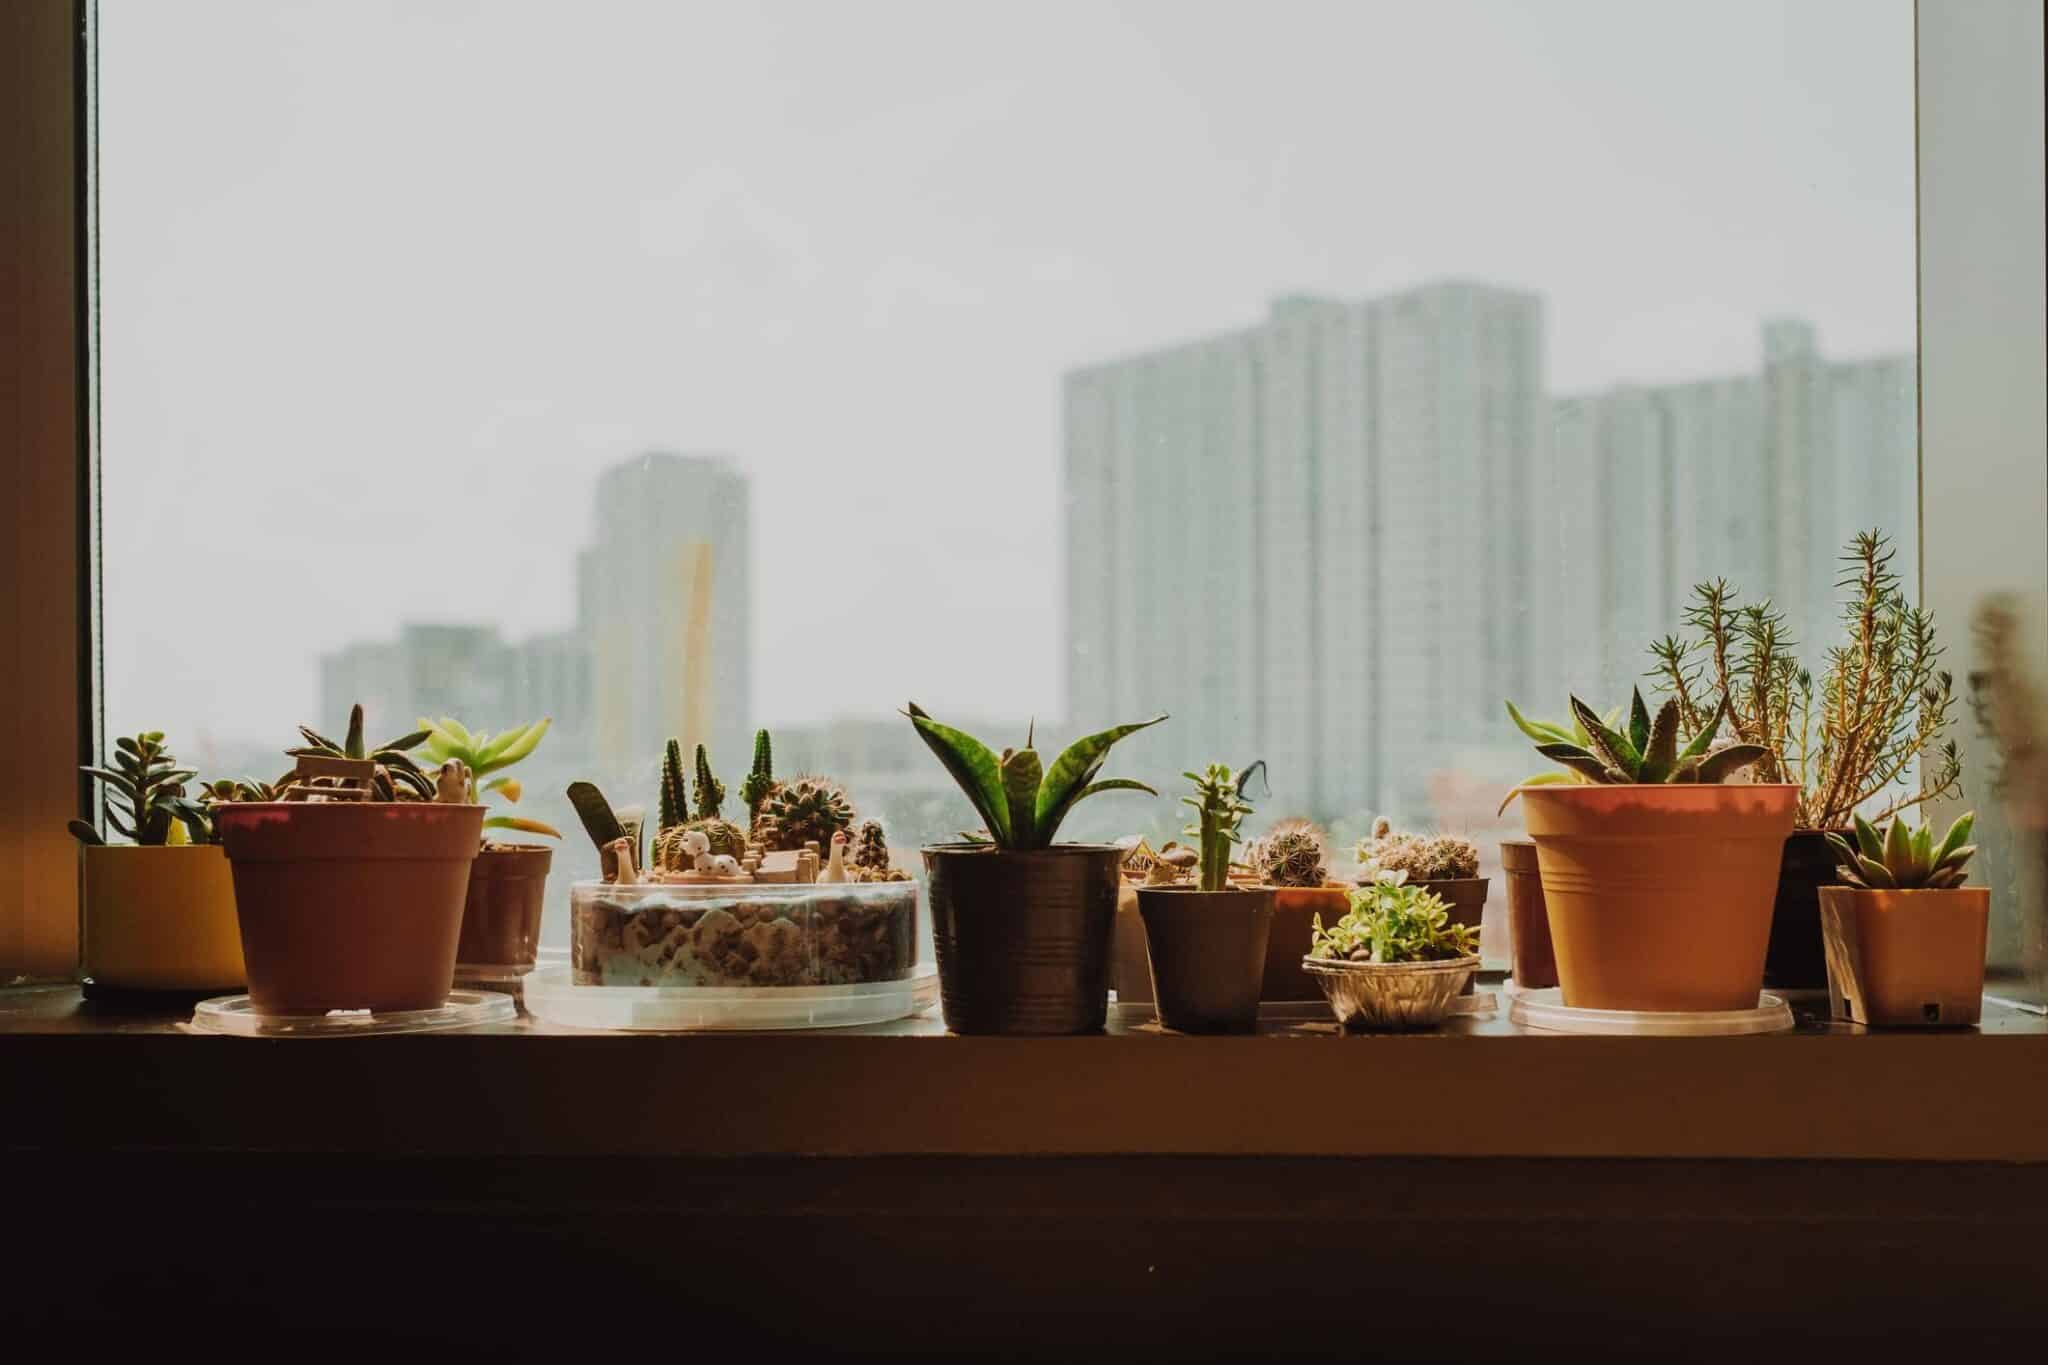 Potted Plants On Window Sill Against Sky In City